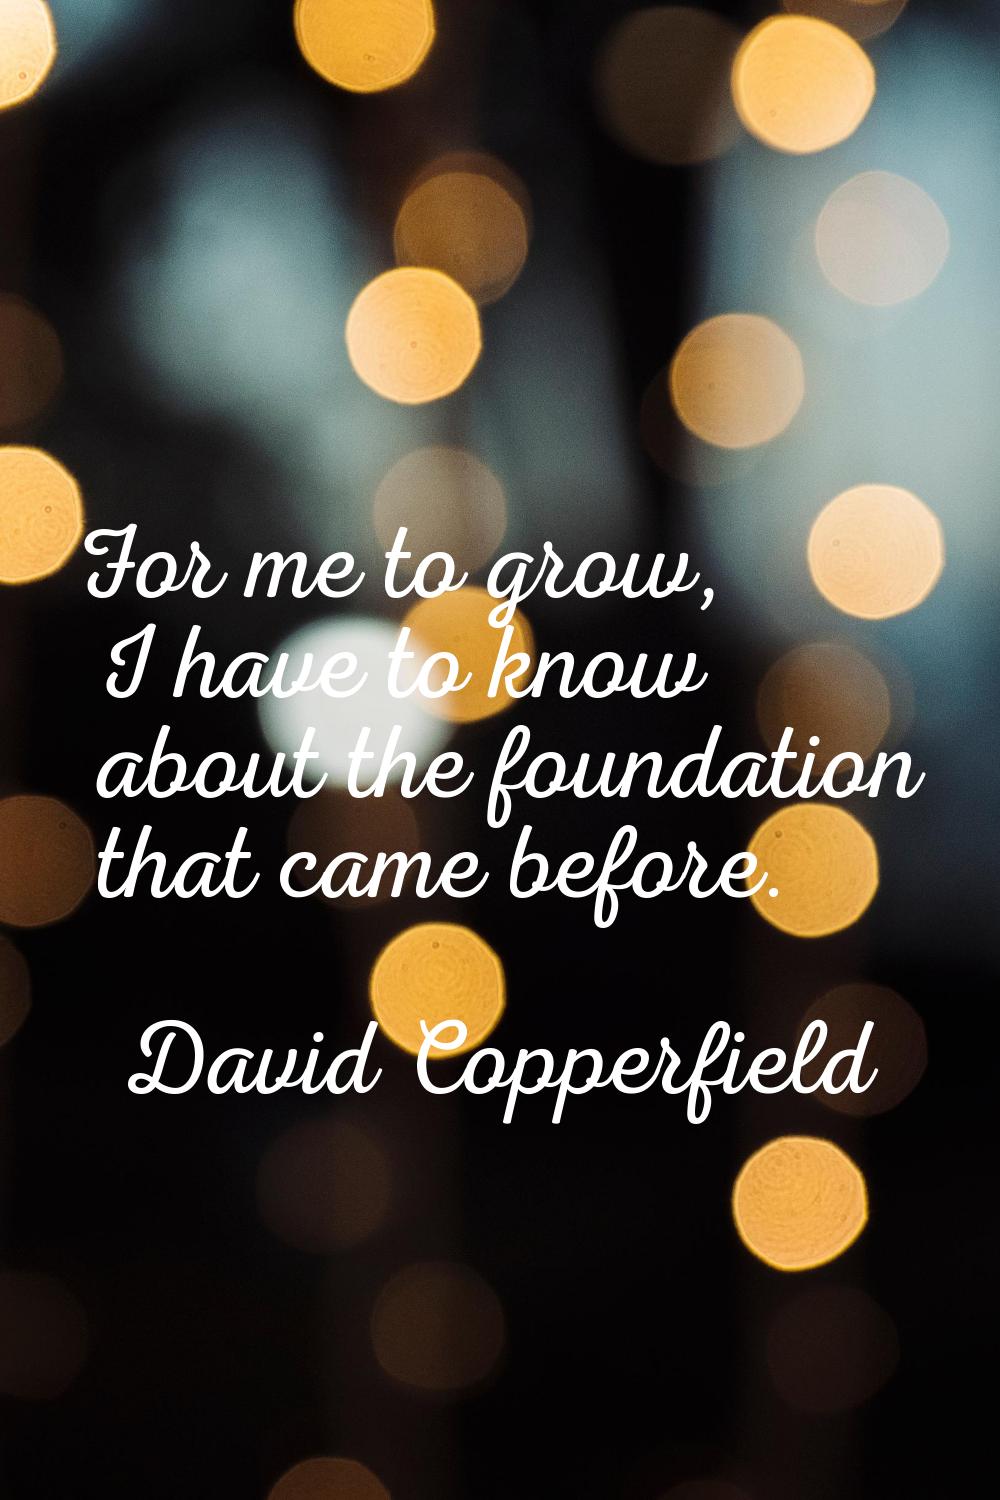 For me to grow, I have to know about the foundation that came before.